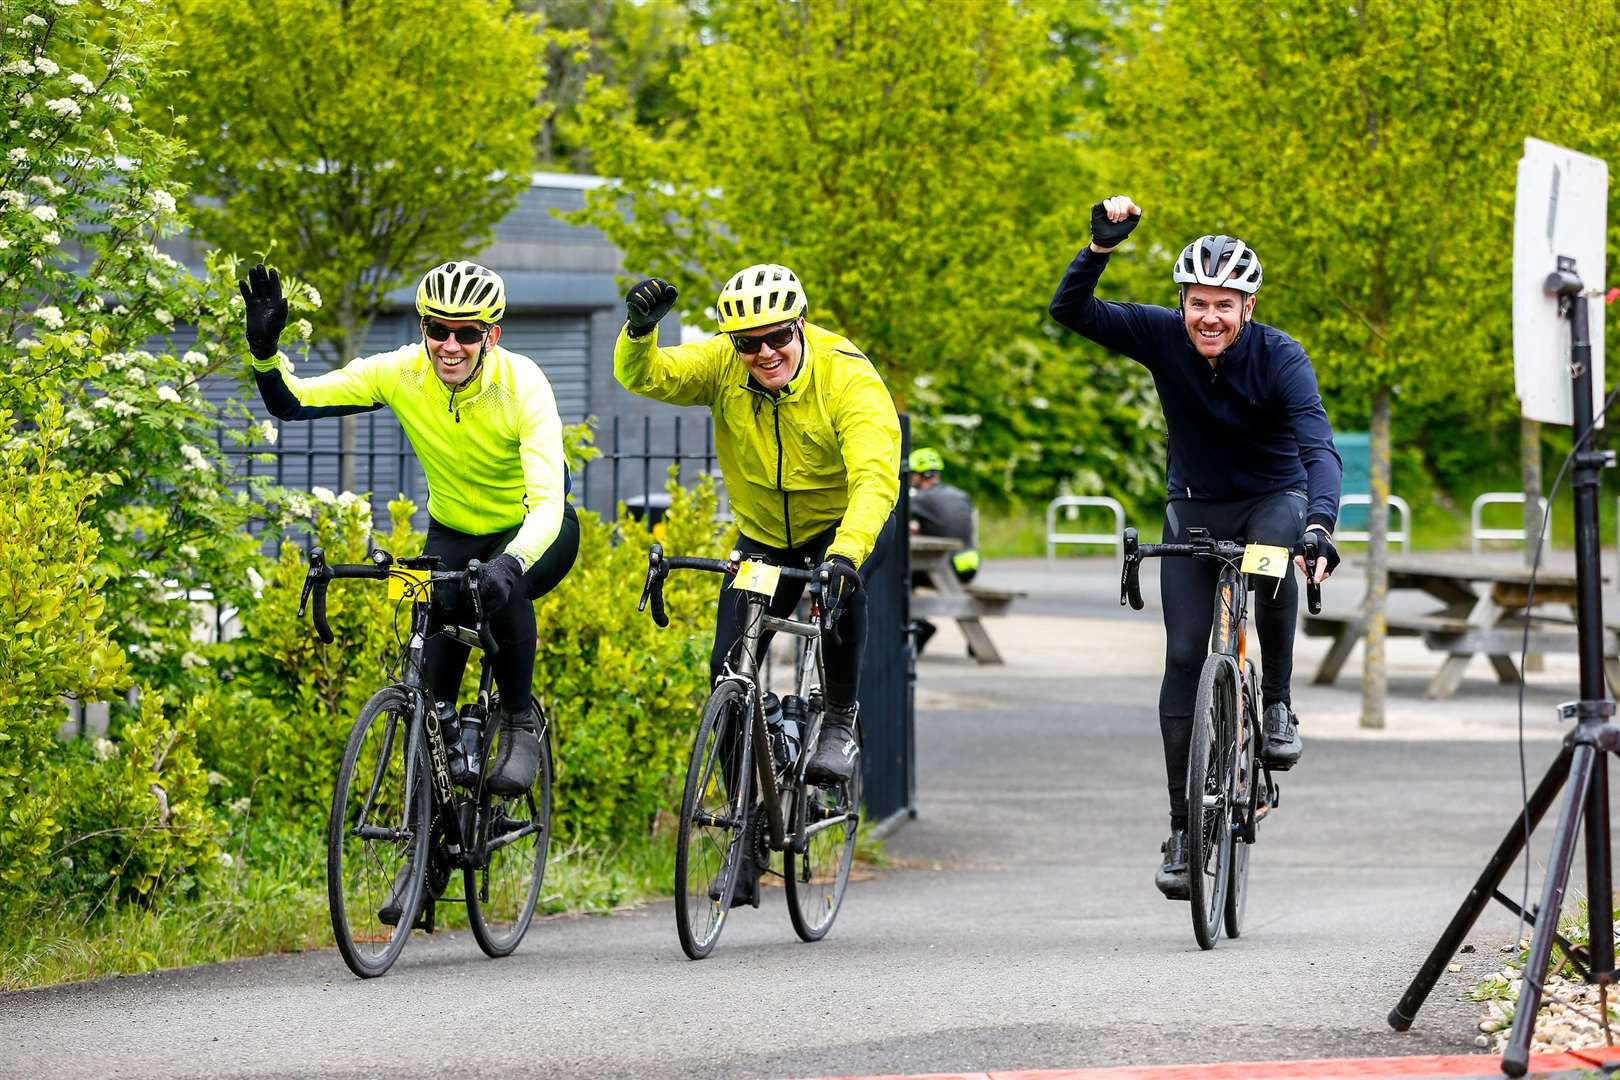 Keith Deacon, Derek Moore and Phil Jones completed the 100K route at the KM Big Bike Ride at Cyclopark, Gravesend. (47415678)